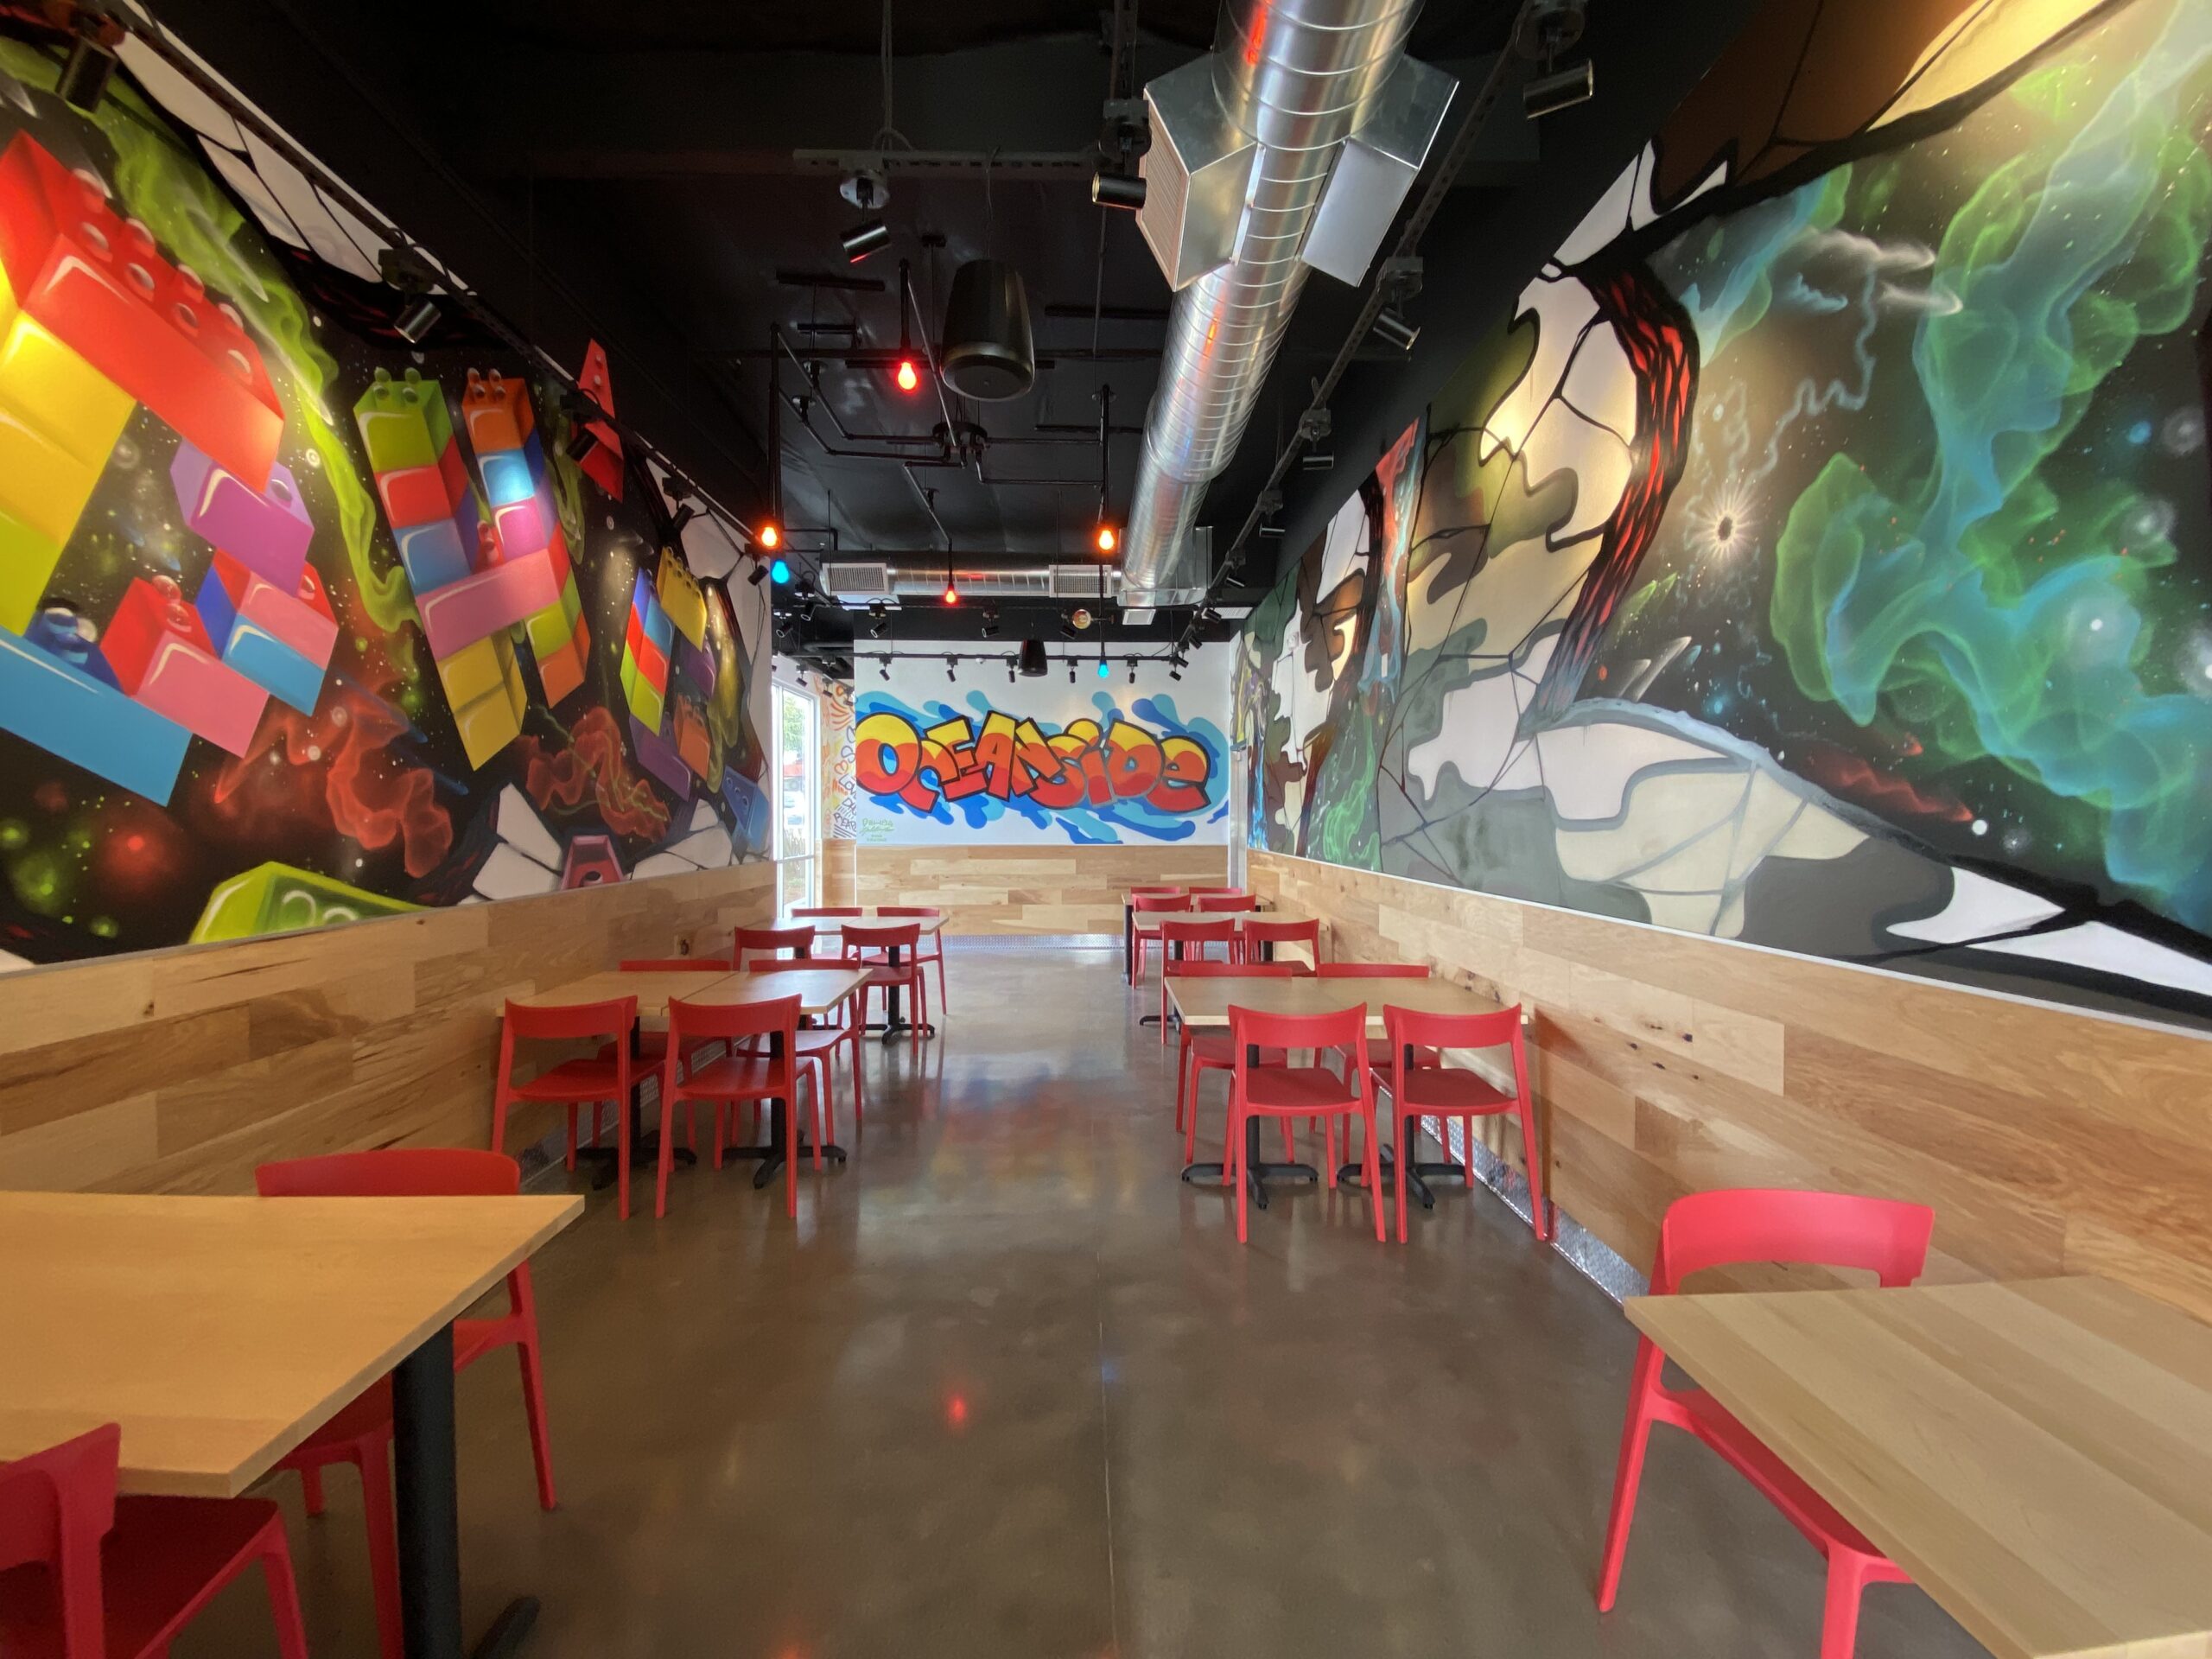 Bright interior photo of Dave's Hot Chicken in OceaNside, CA that has the word Oceanside in graffiti